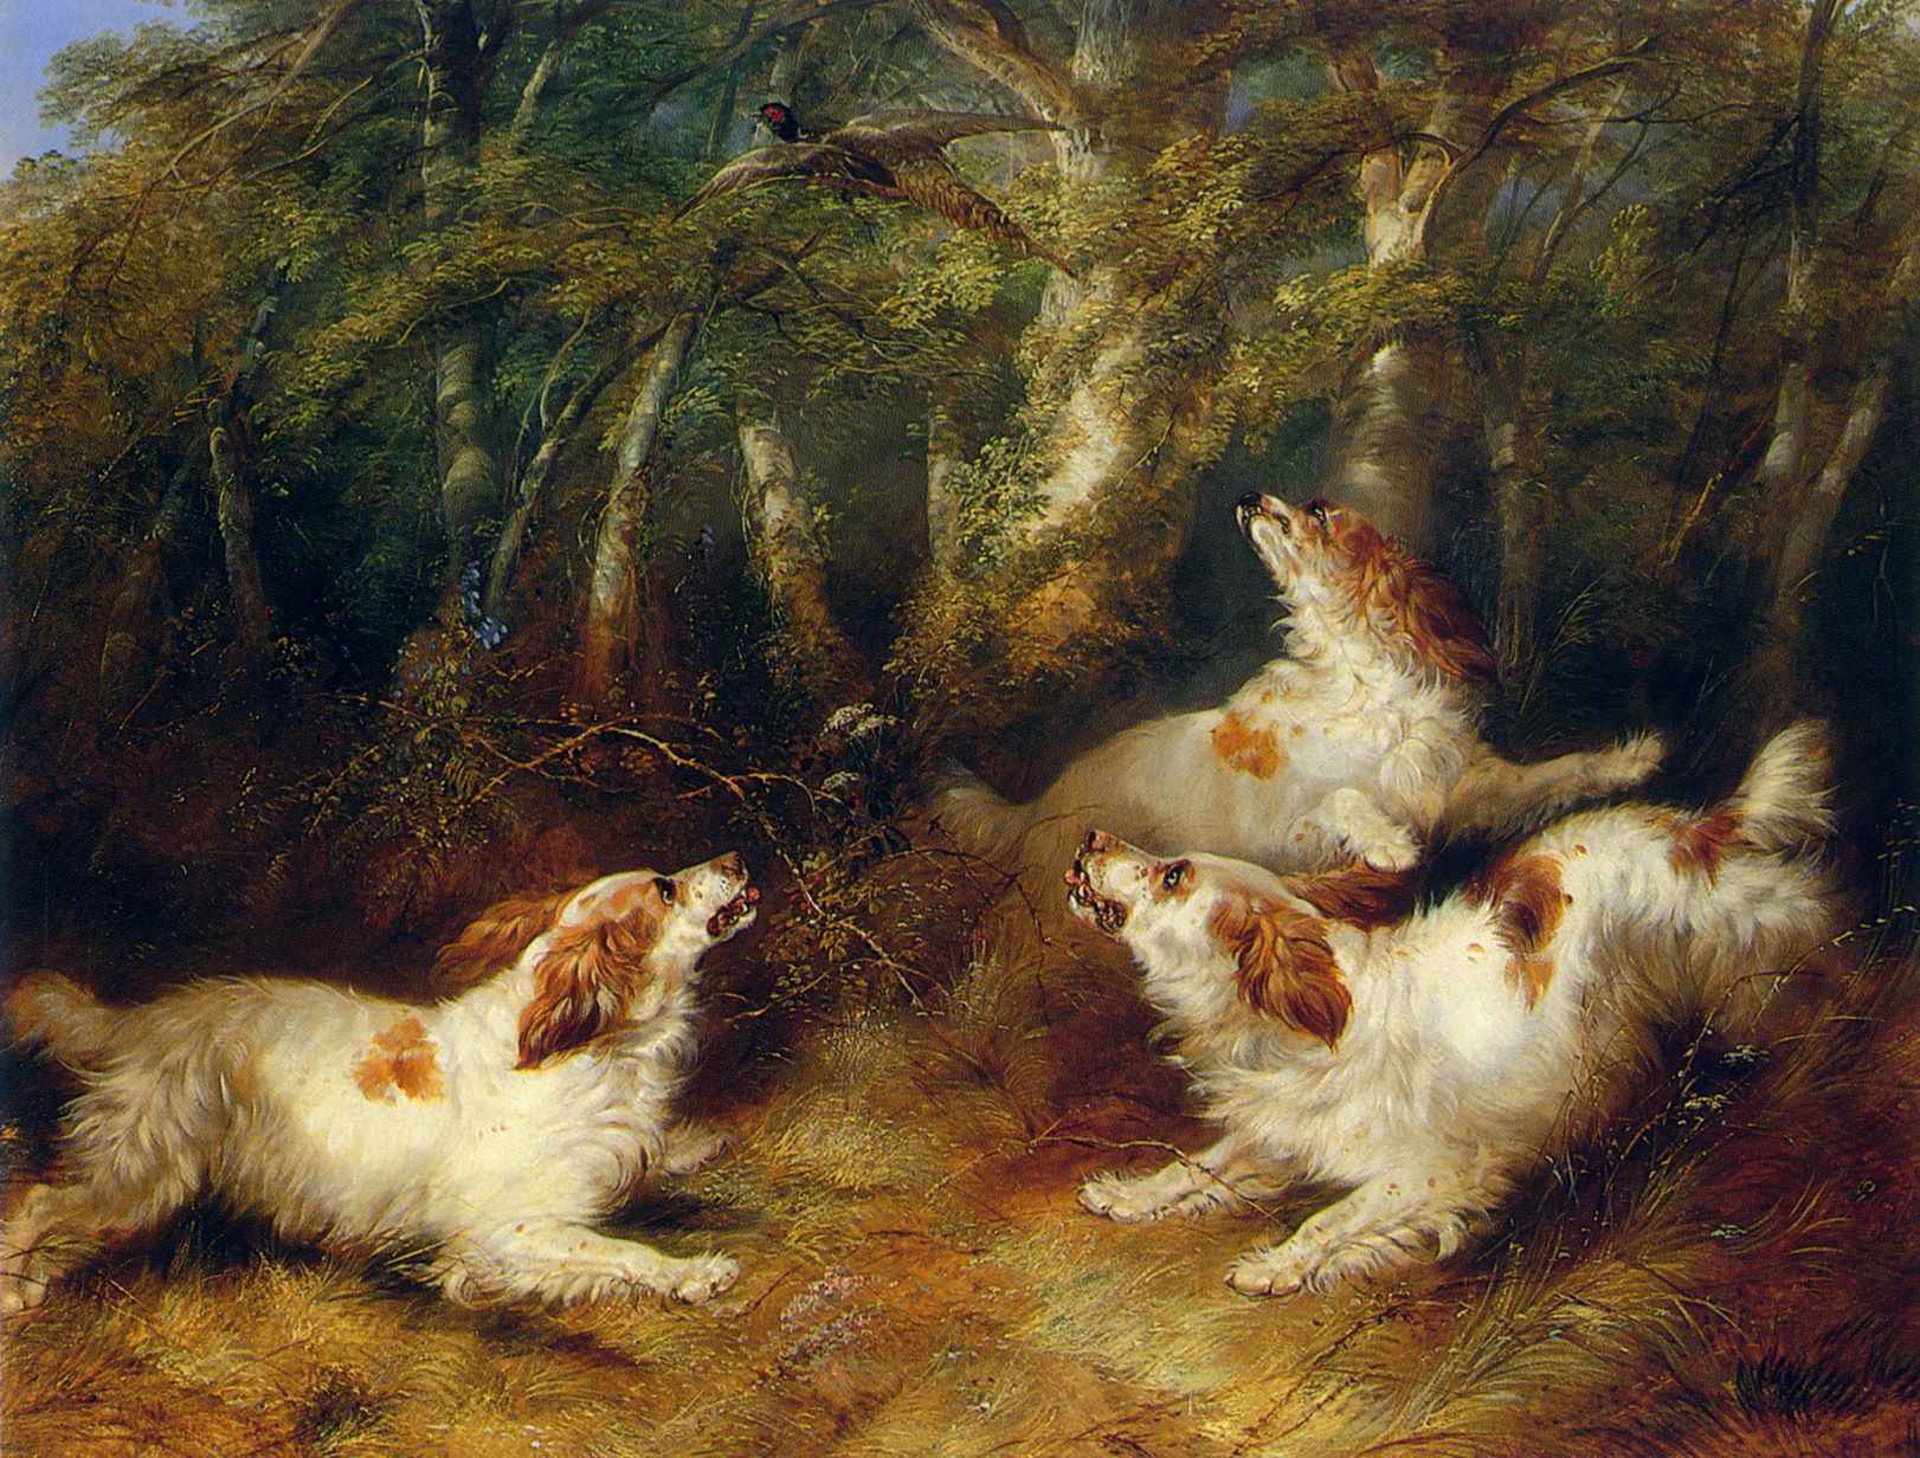 Spaniels Putting up a Pheasant by George Armfield